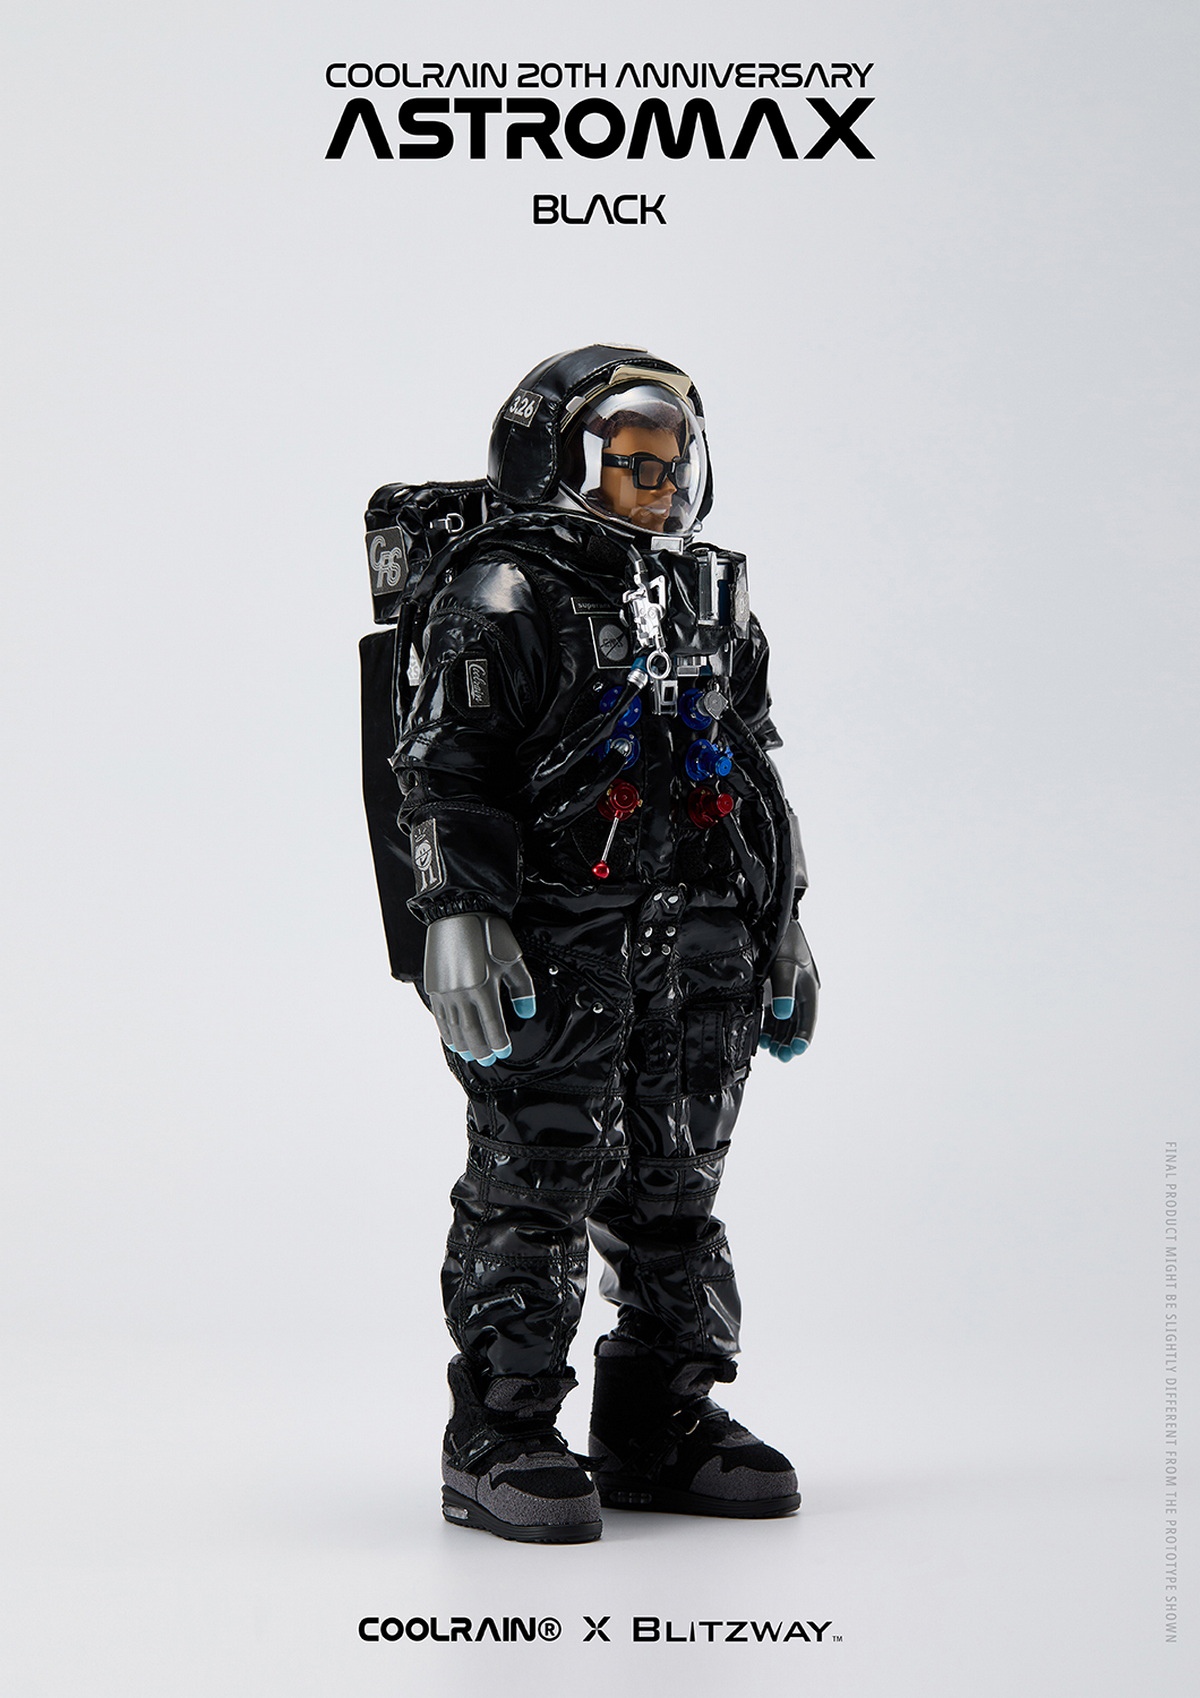 Coolrain - NEW PRODUCT: Coolrain x Blitzway - Astromax Astronaut [Black/White/Silver/Blue] 14228